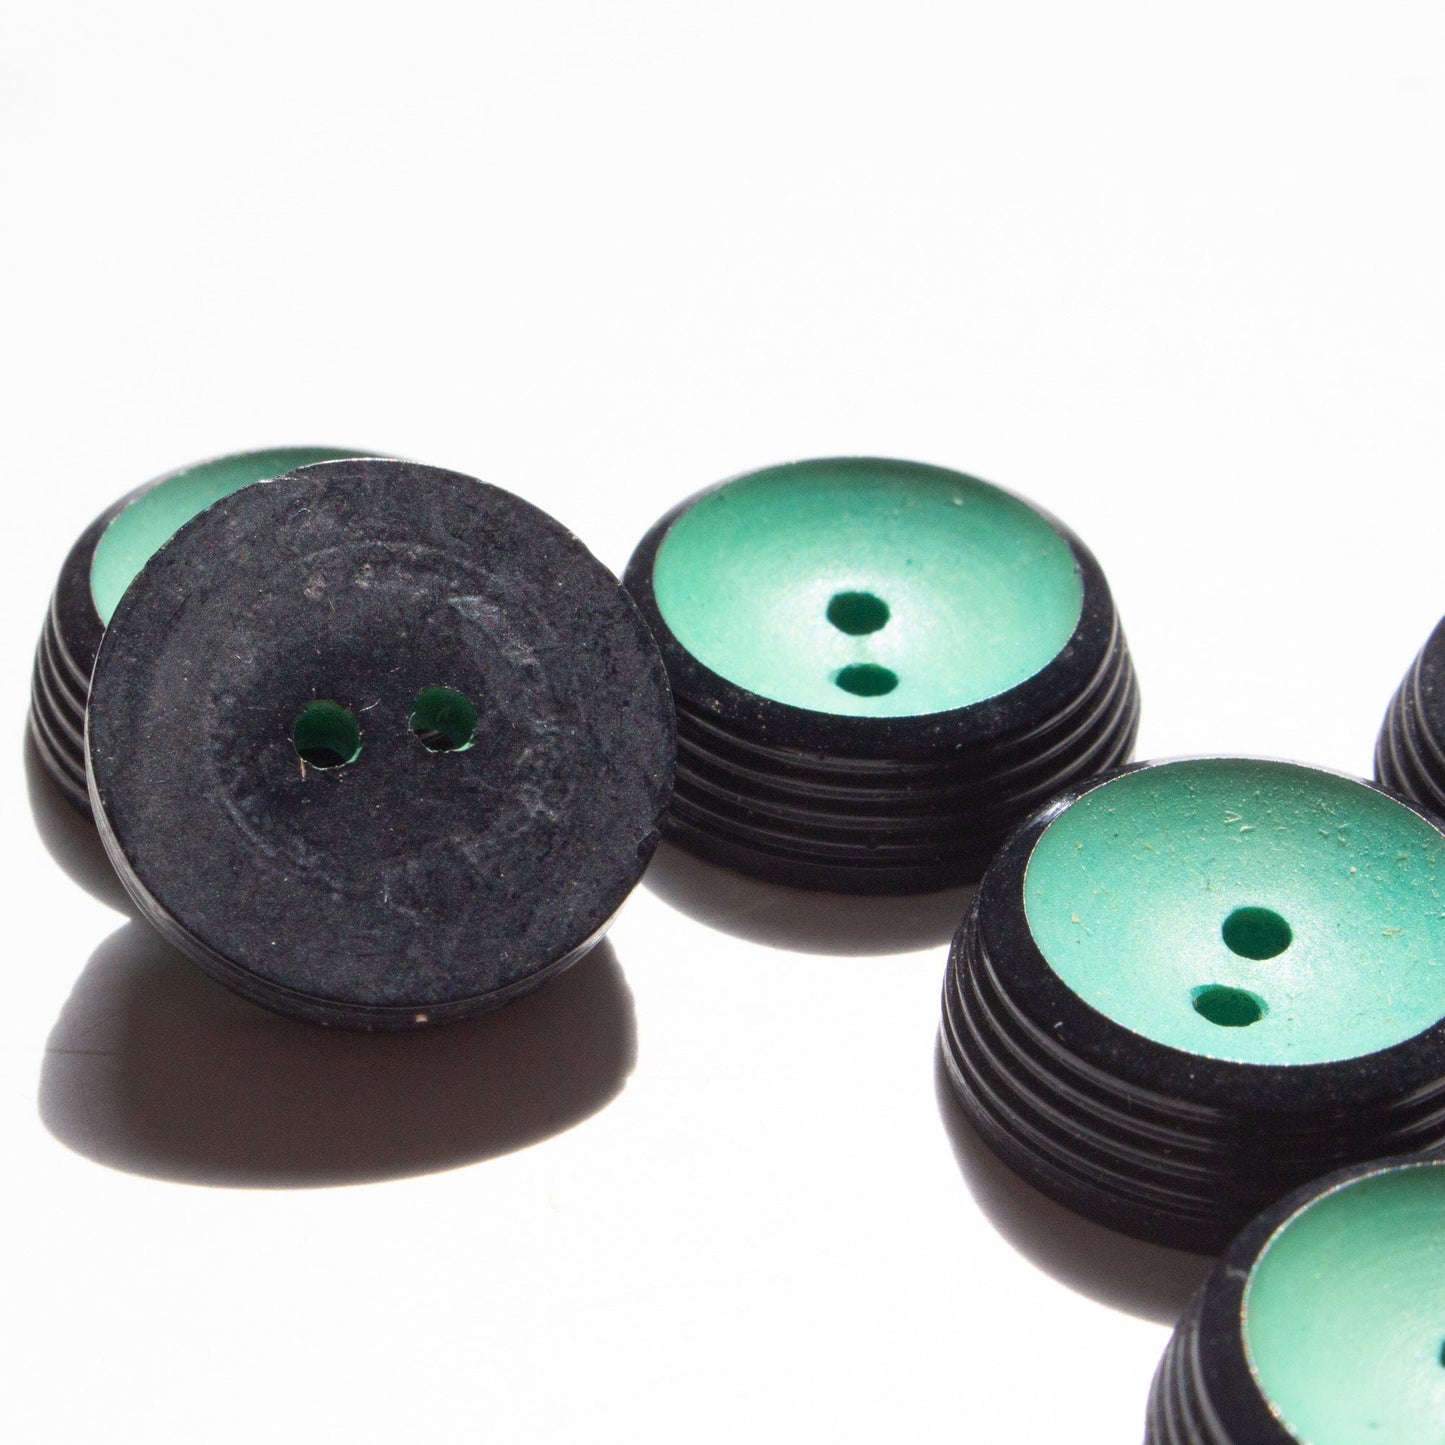 6 Vintage Wooden Buttons in Green and Black - 16 mm